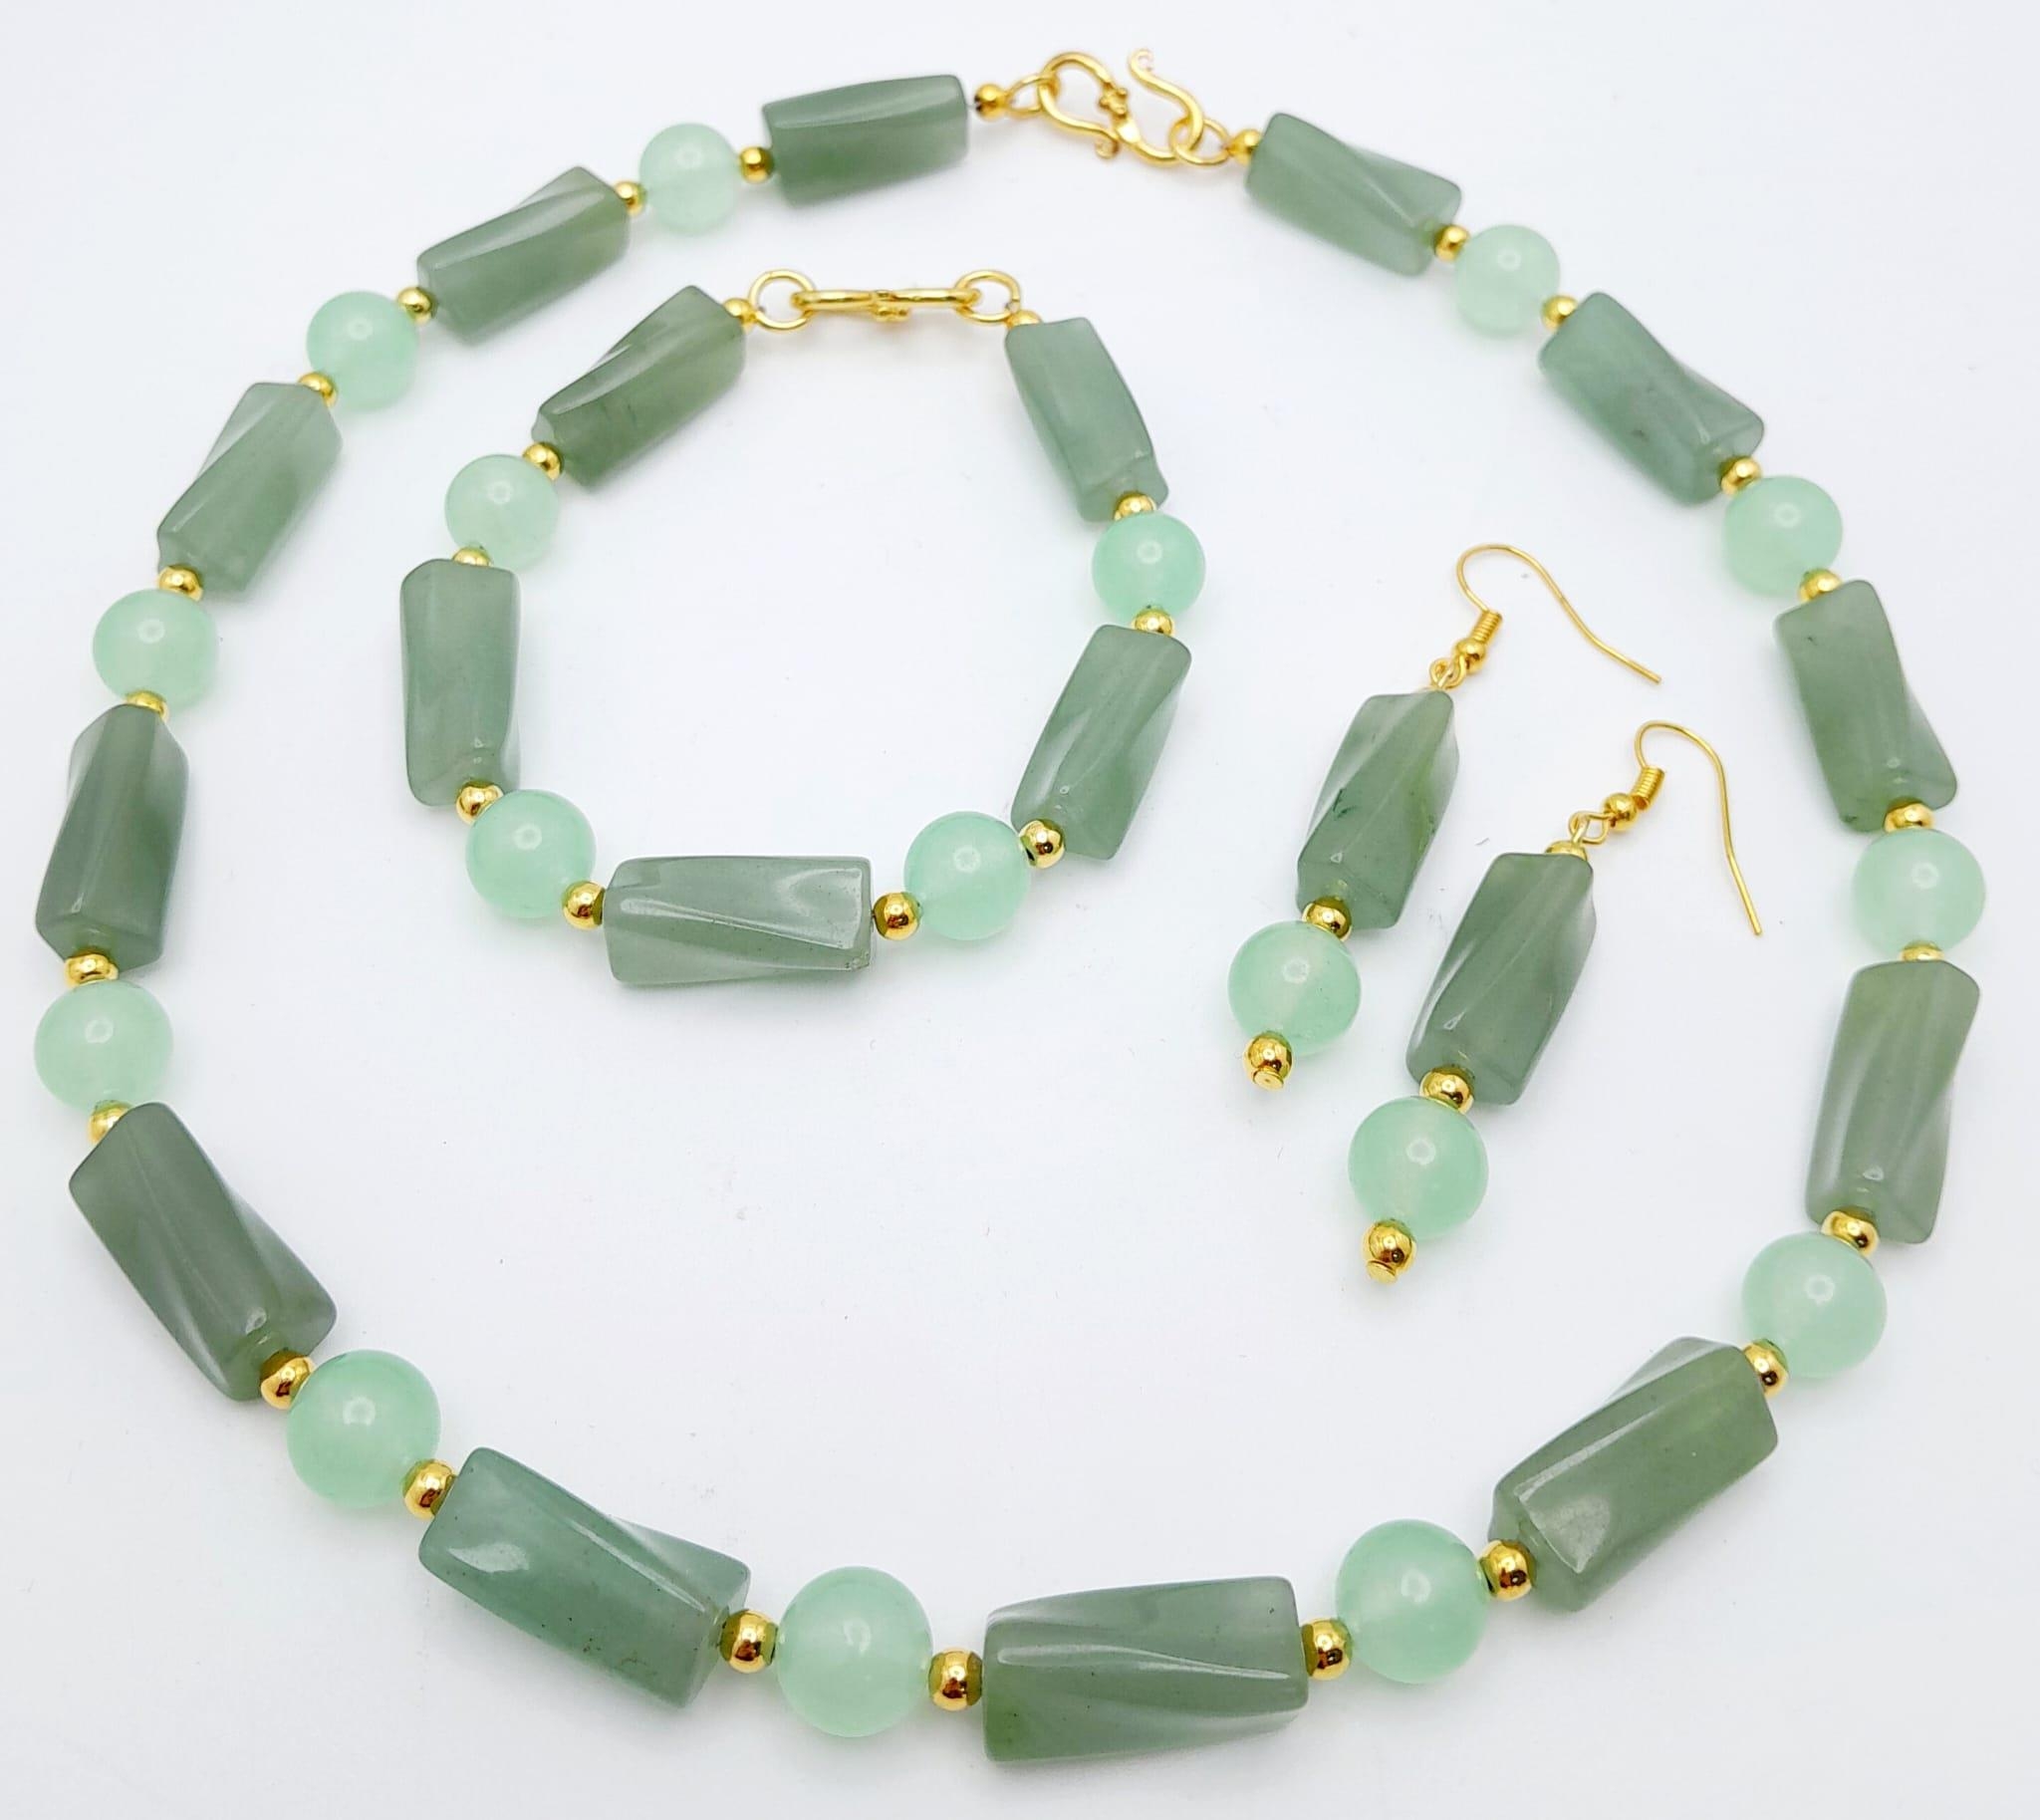 A high-quality light green, semi-translucent, jade necklace, bracelet and earrings set. Necklace